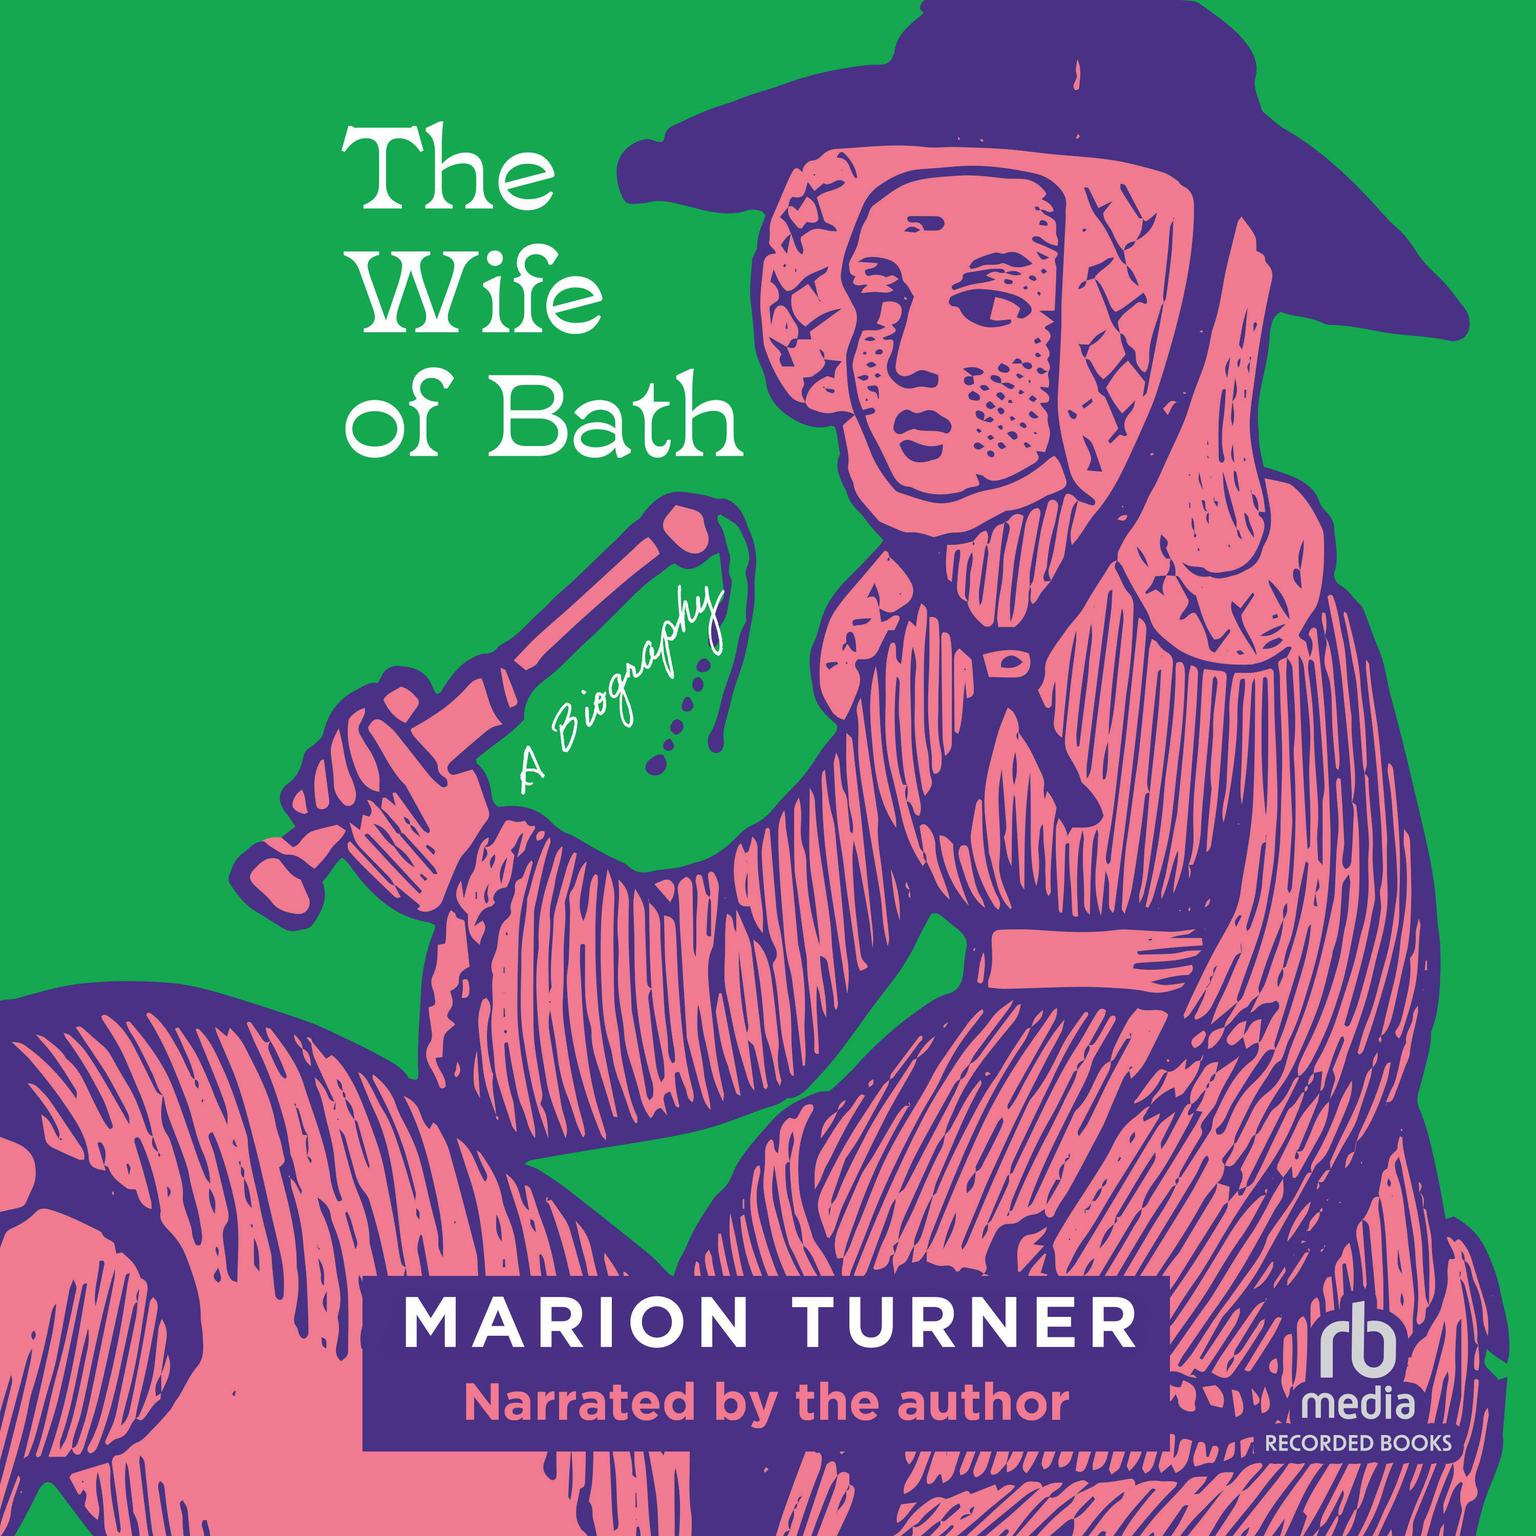 The Wife of Bath: A Biography Audiobook, by Marion Turner